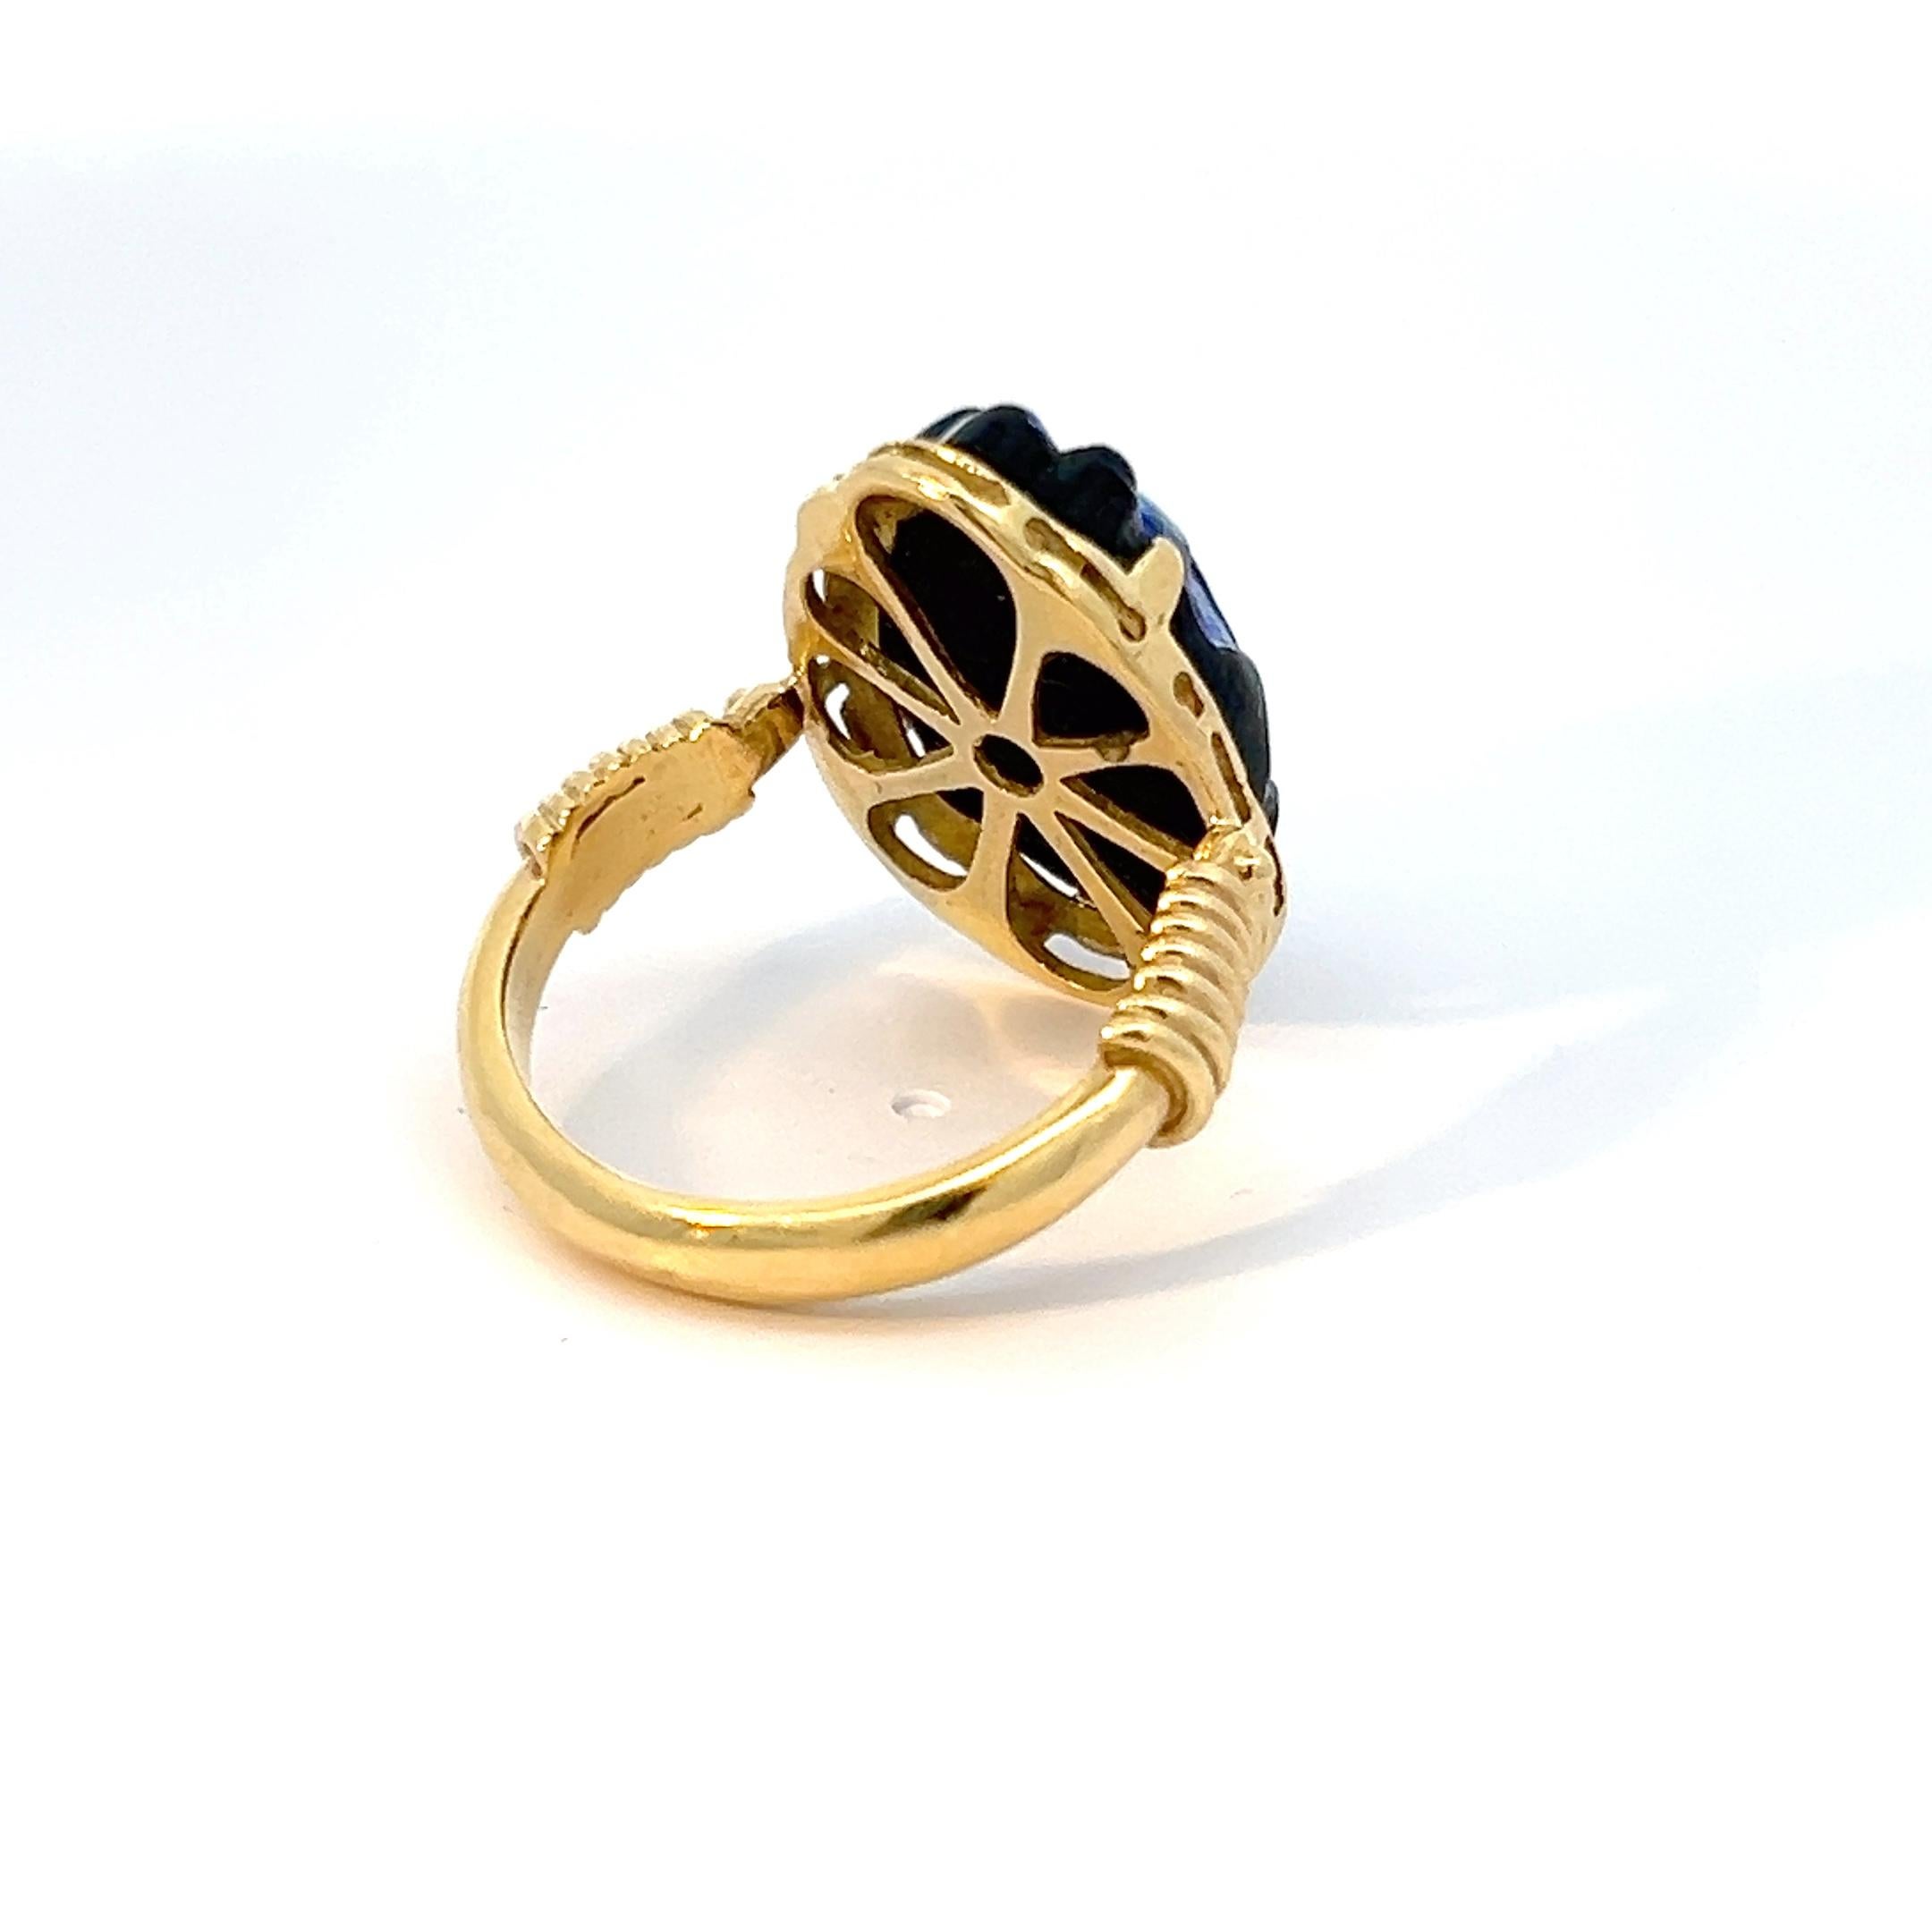 Indulge in the timeless allure of luxury with this exquisite 18k yellow gold ring, adorned with a rare vintage Tiffany Favrile cobalt blue glass scarab designed by the renowned artist Lois Sasson. A true treasure, this ring exudes a sense of